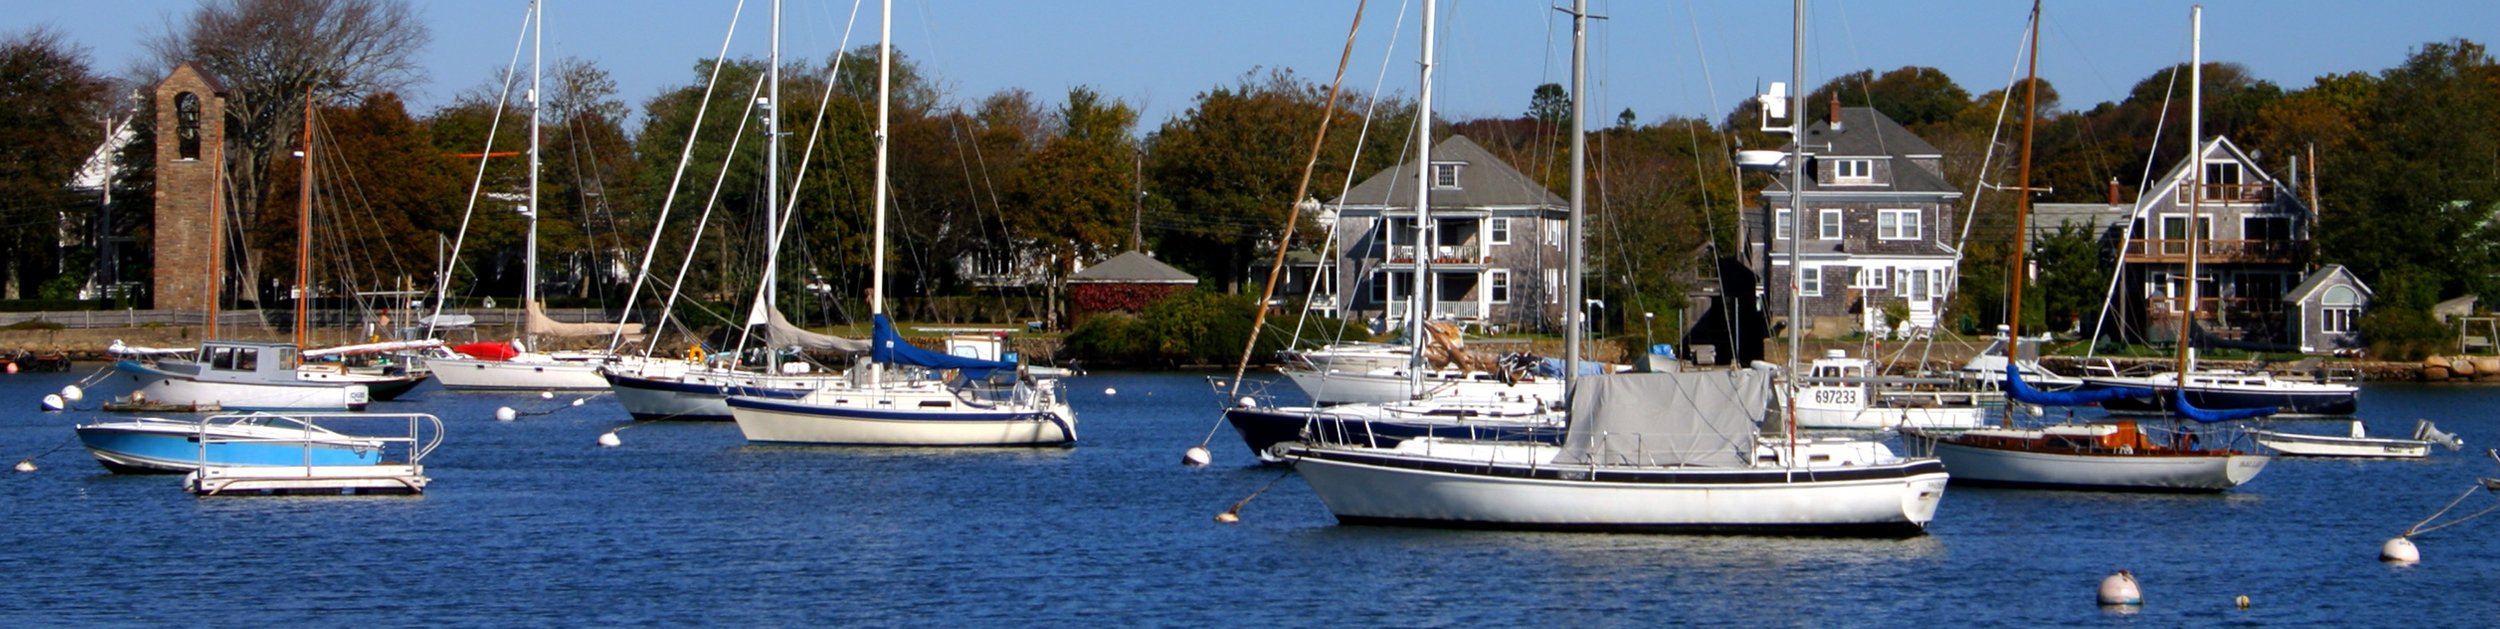 view of many sail boats on the water